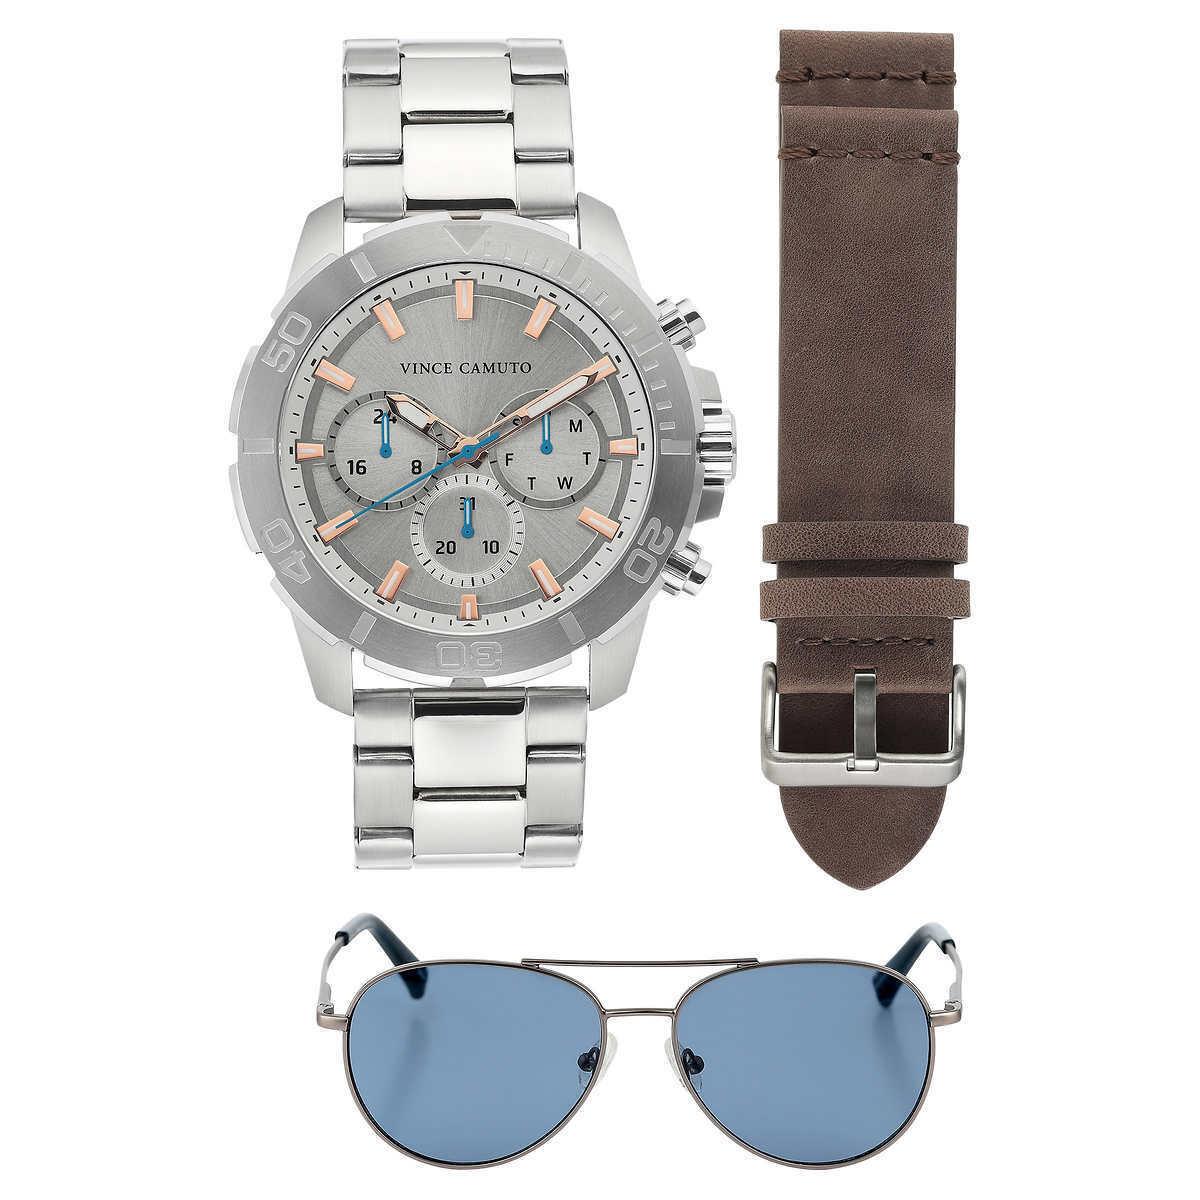 Vince Camuto Men s Chronograph Watch Gift Set with Sunglasses VC/1147GYSVST